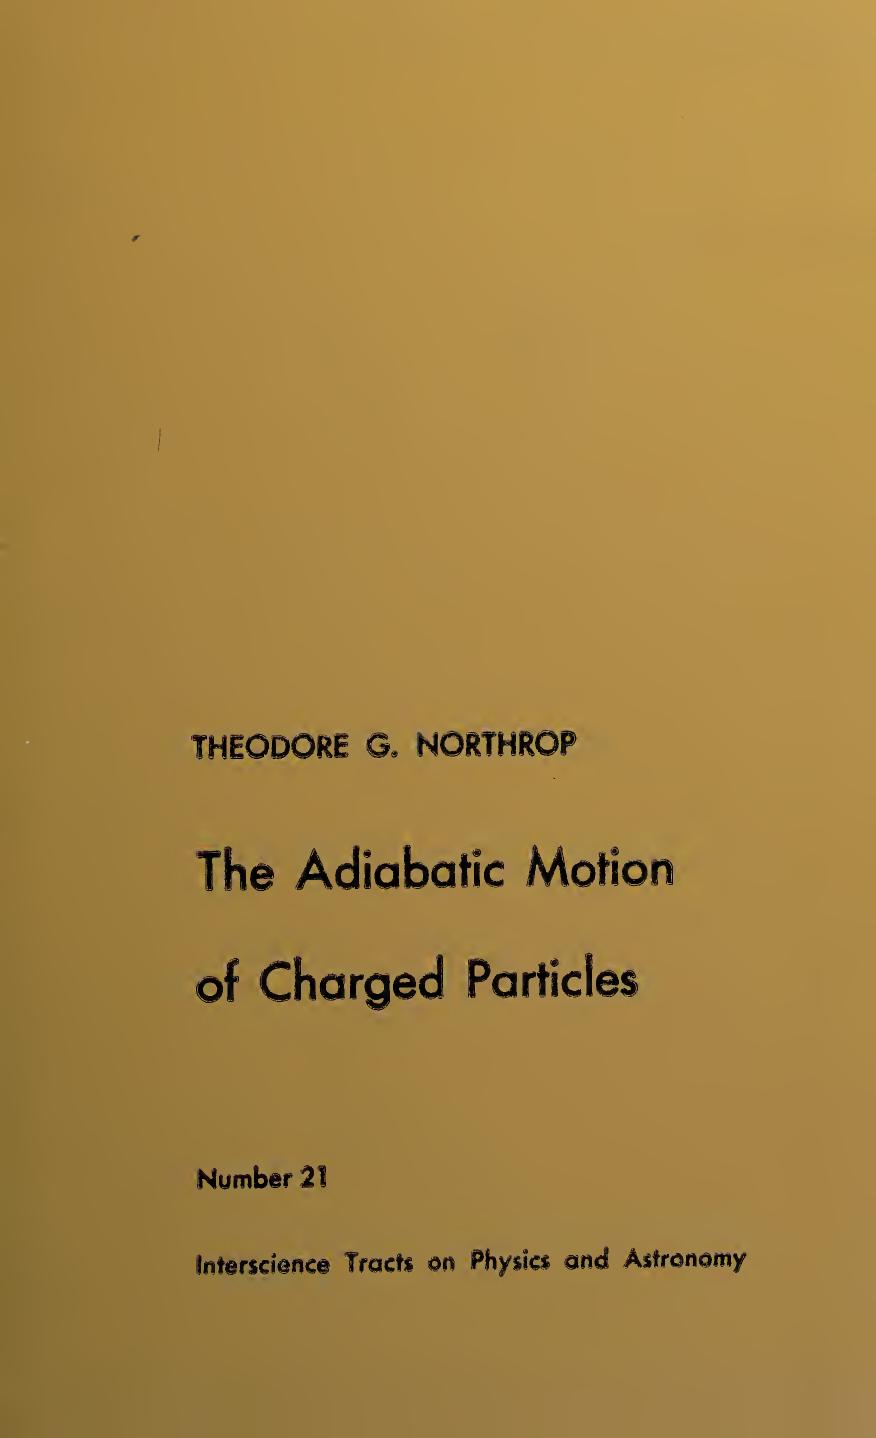 The Adiabatic Motion of Charged Particles (Interscience Tracts on Physics & Astronomical) by Theodore G. Northrop